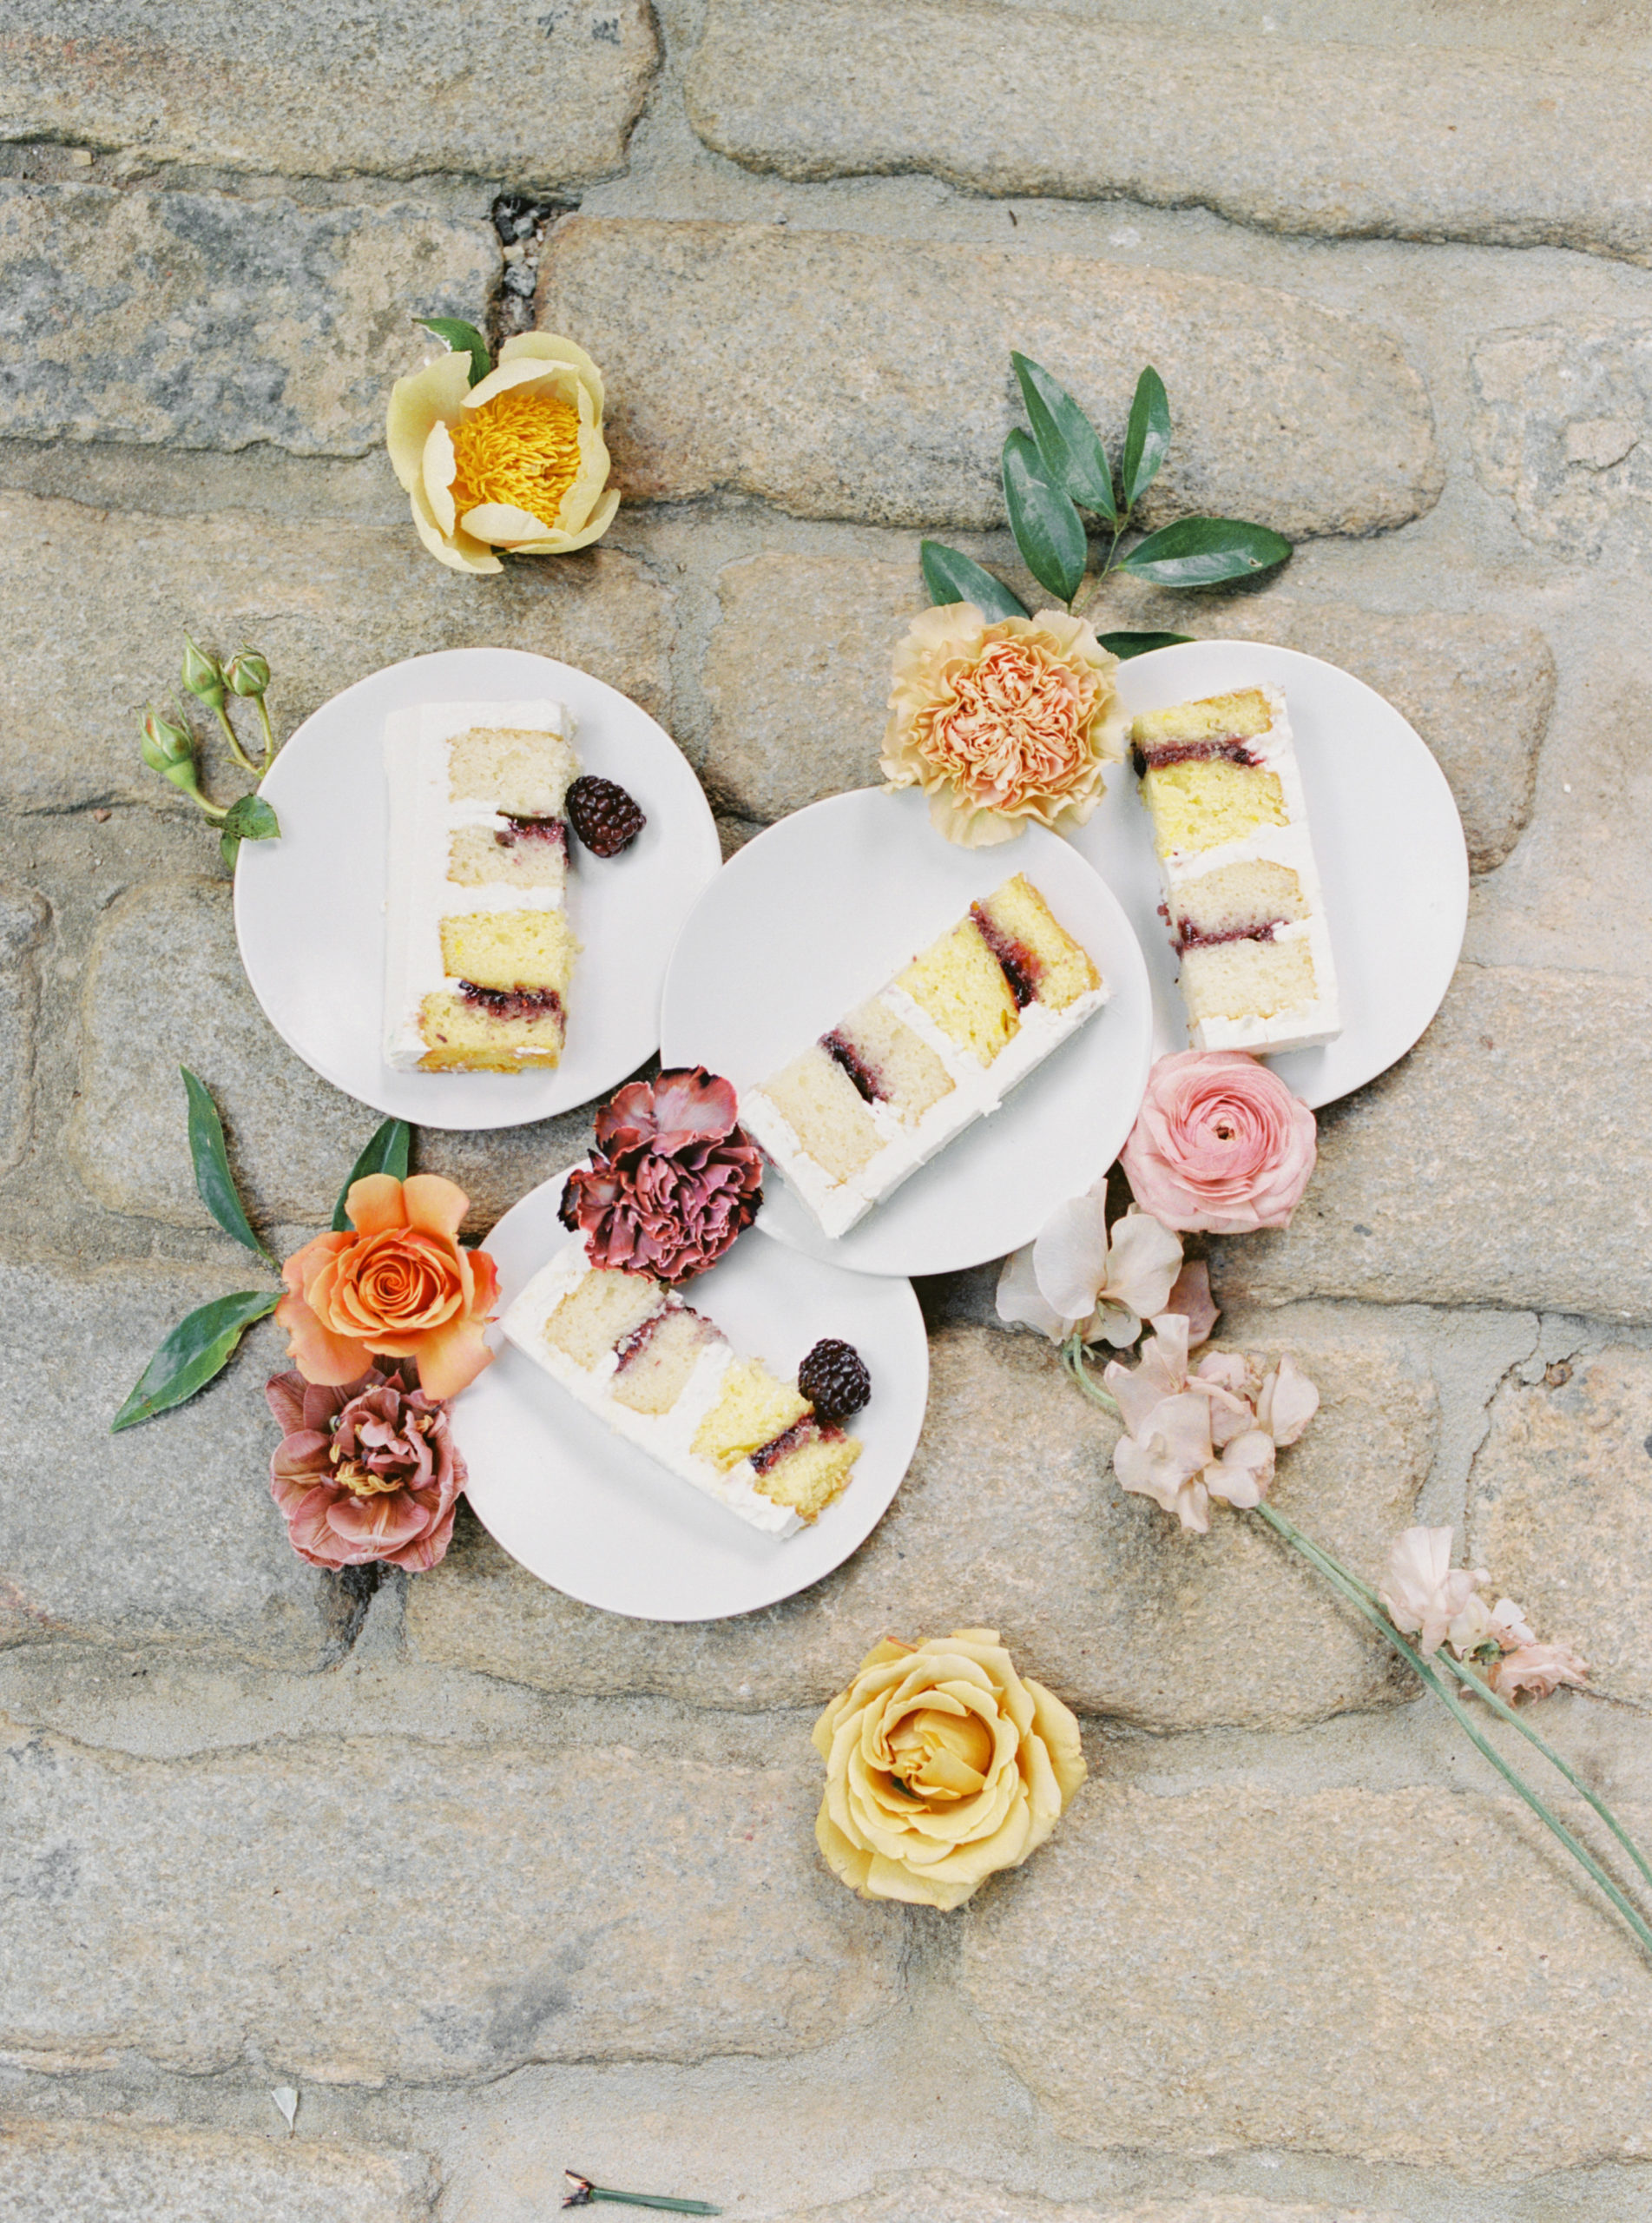 Slices of lemon, blackberry cake on white plates with florals